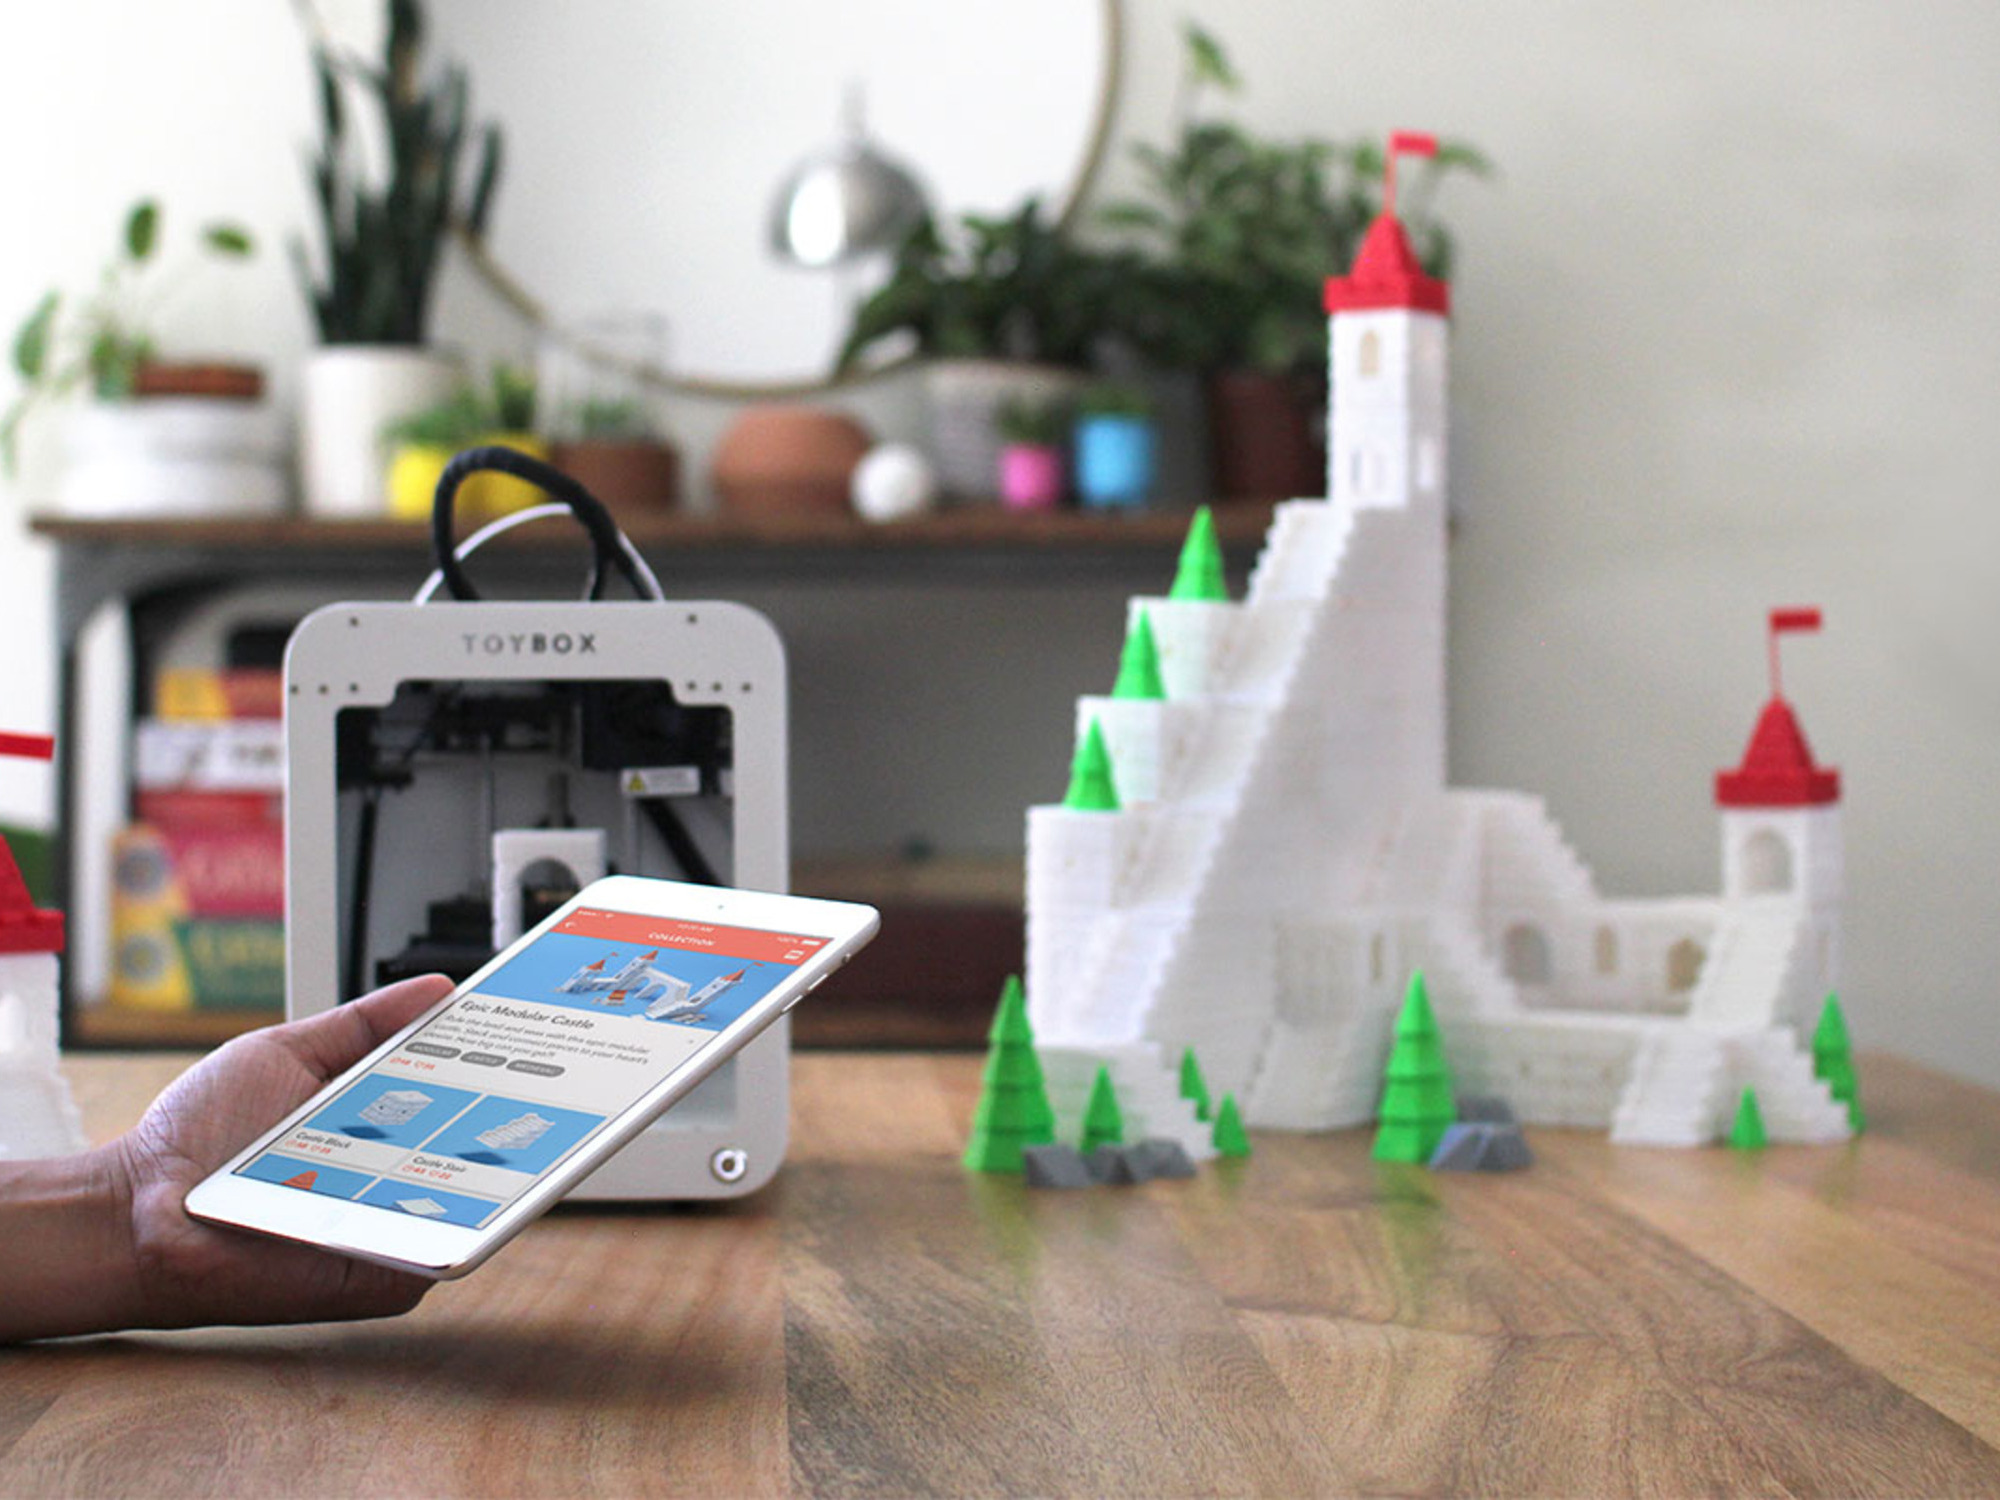 Make your own fun with this 3D Printer